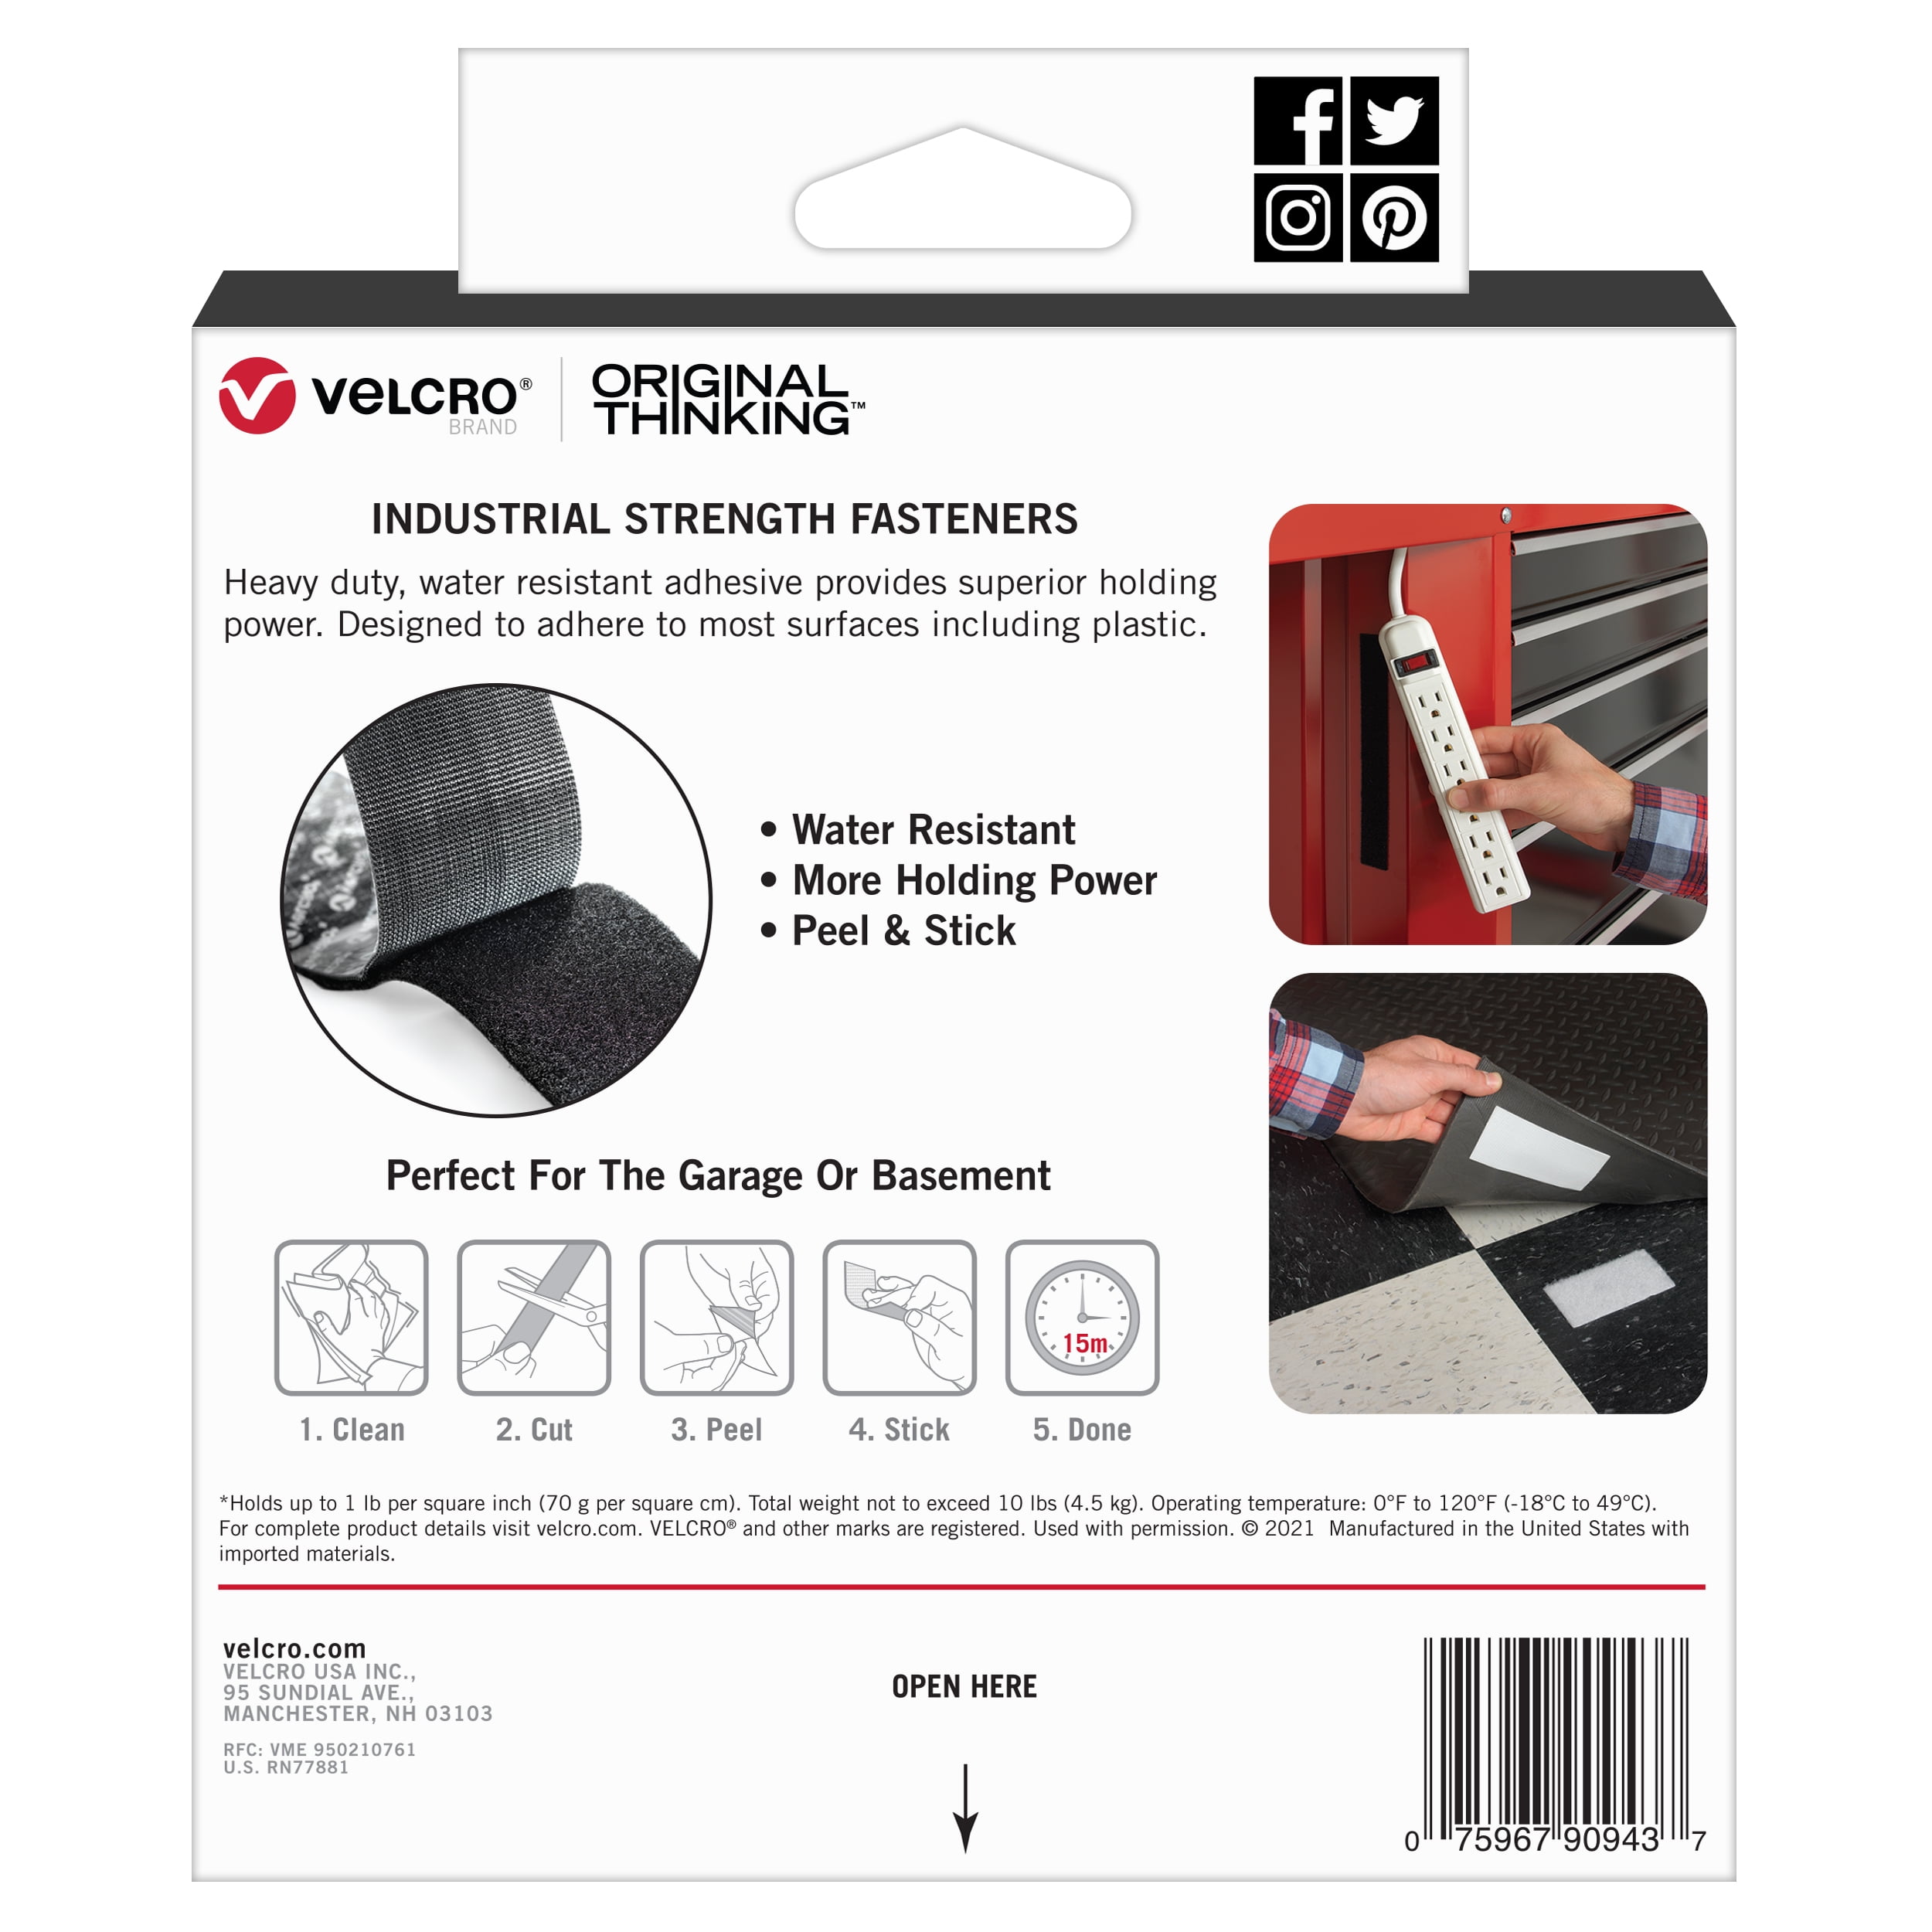  VELCRO Brand Extreme Outdoor Heavy Duty Tape, 10Ft x 1 in, Holds 15 lbs & Heavy Duty Tape with Adhesive, 15 Ft x 2 in